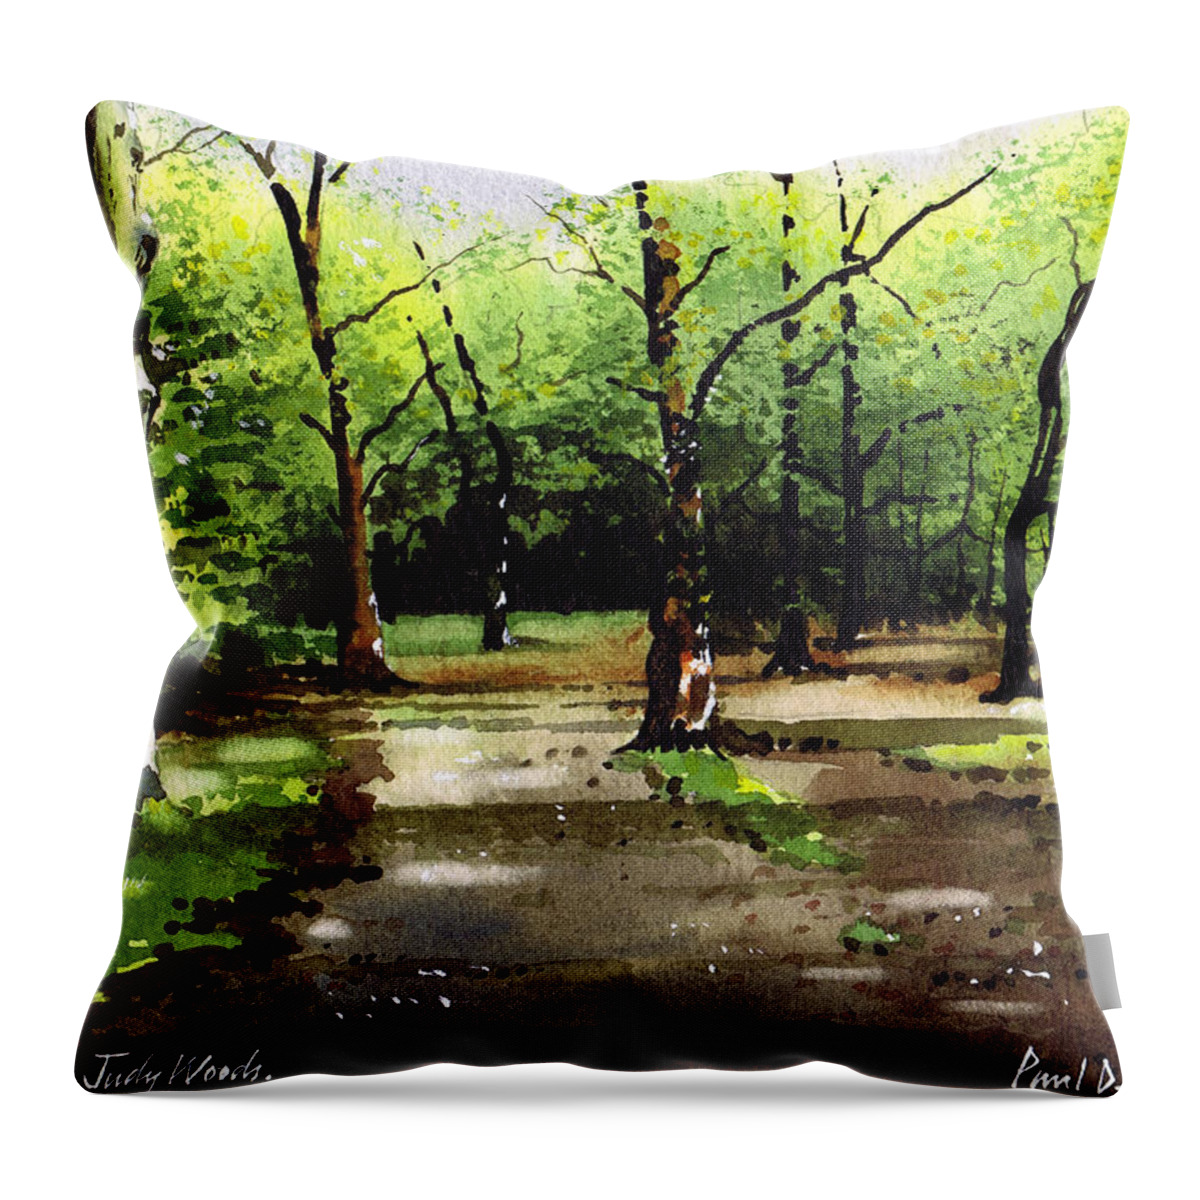 Woods Throw Pillow featuring the painting Path Through Judy Woods by Paul Dene Marlor